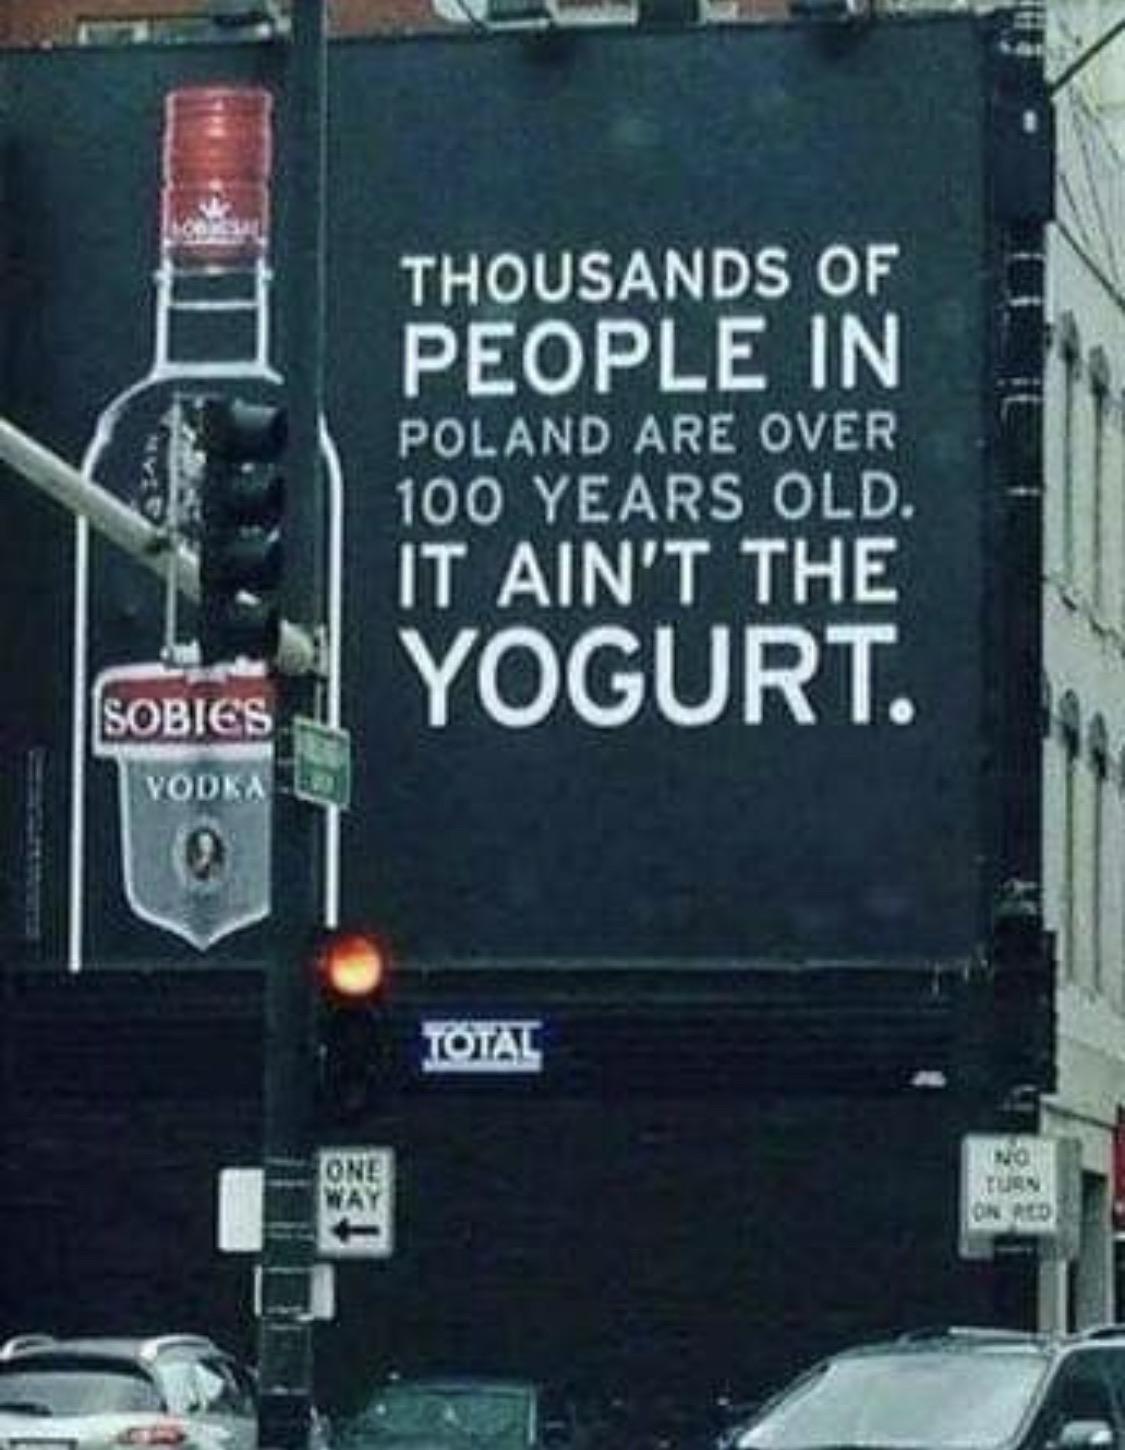 awesome pics and memes - thousands of people in poland are over 100 years old - Sobies Vodka Thousands Of People In Poland Are Over 100 Years Old. It Ain'T The Yogurt. Total One Way No Turn On Red